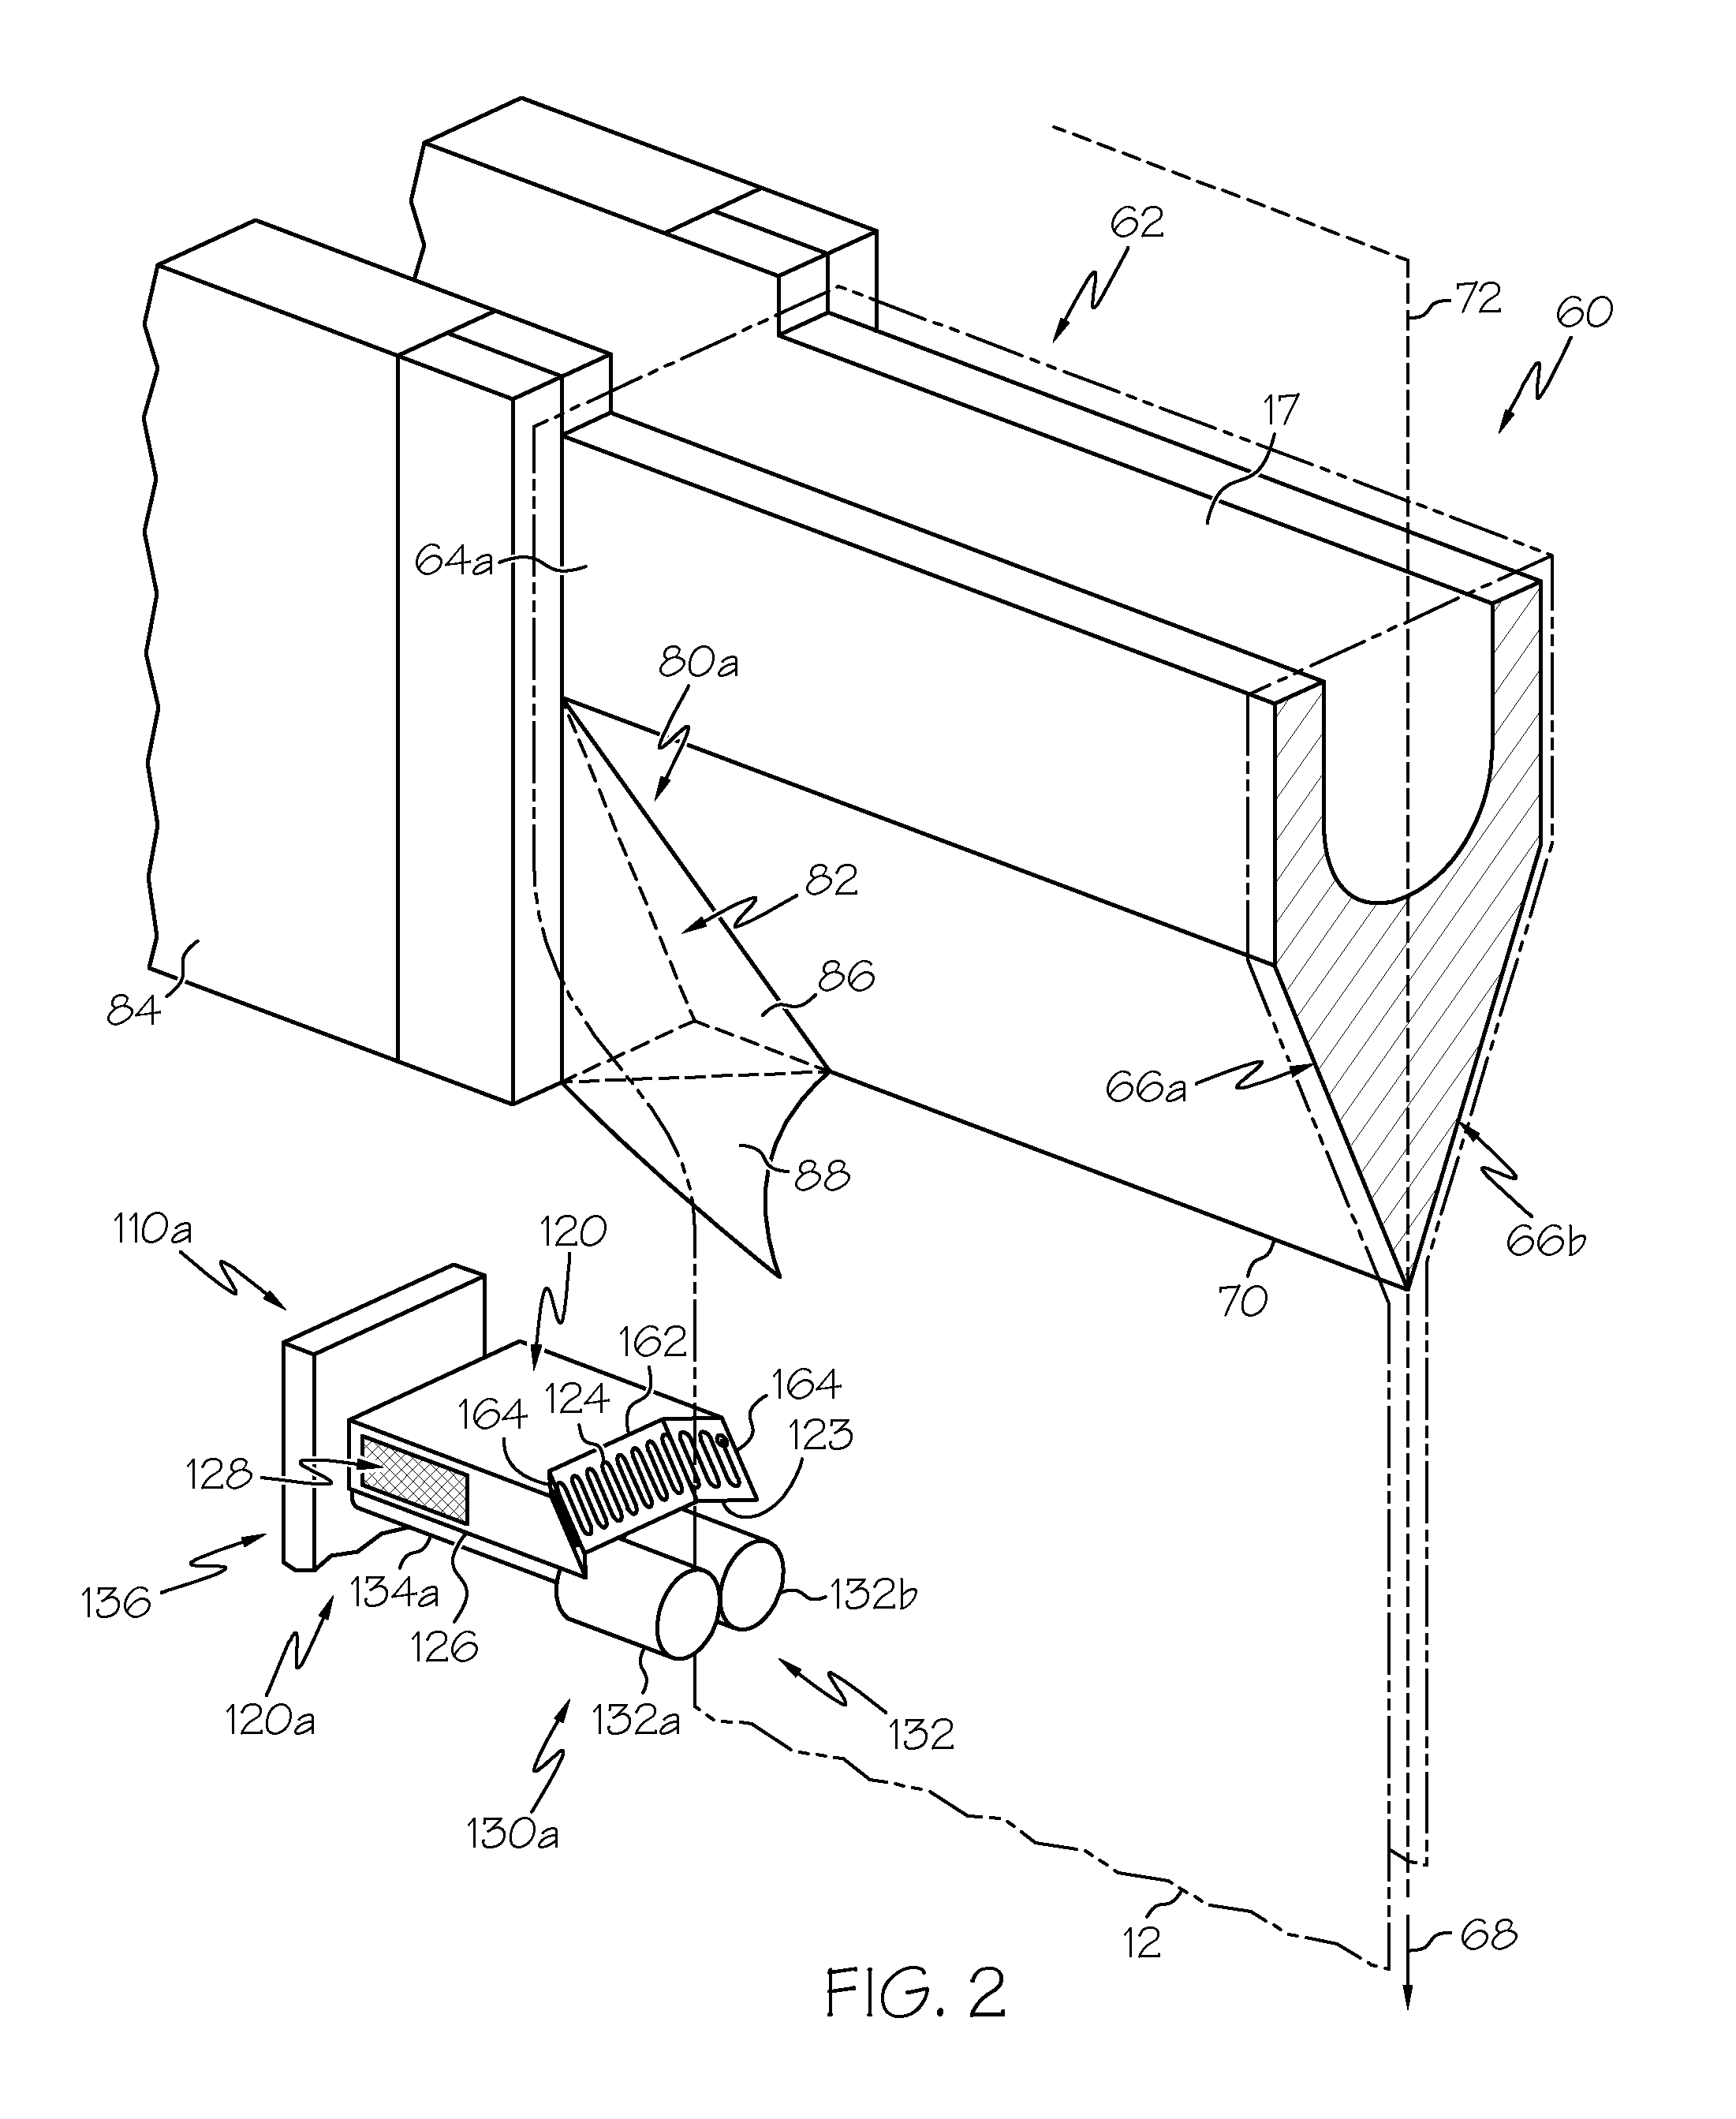 Methods and apparatuses for reducing heat loss from edge directors